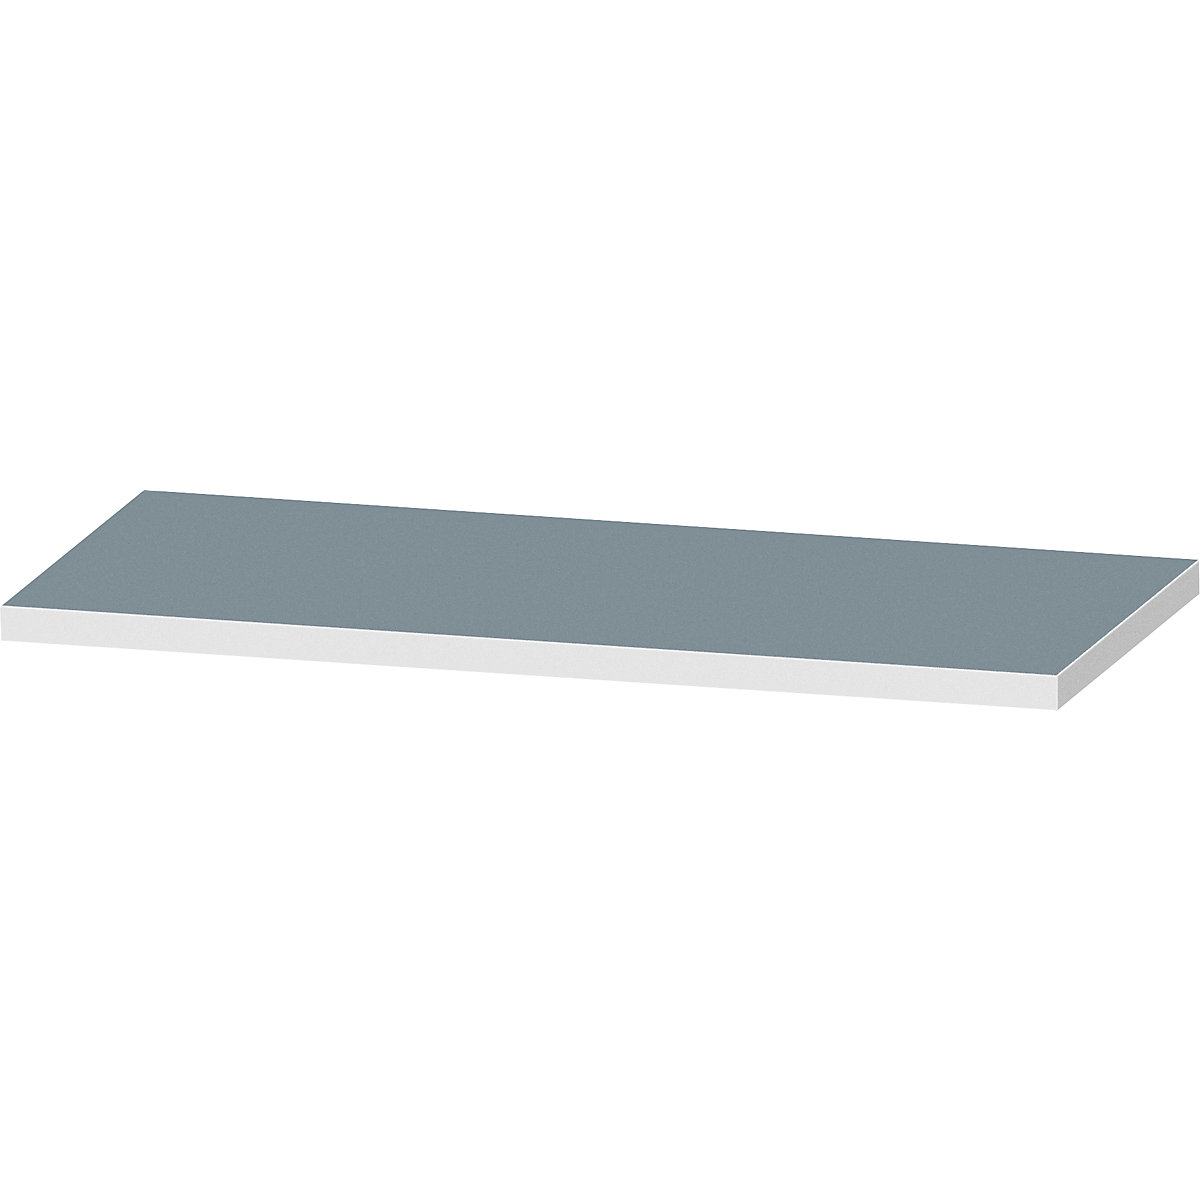 Worktop for workbench – ANKE, worktop with universal cover, width 1500 mm, thickness 50 mm-4